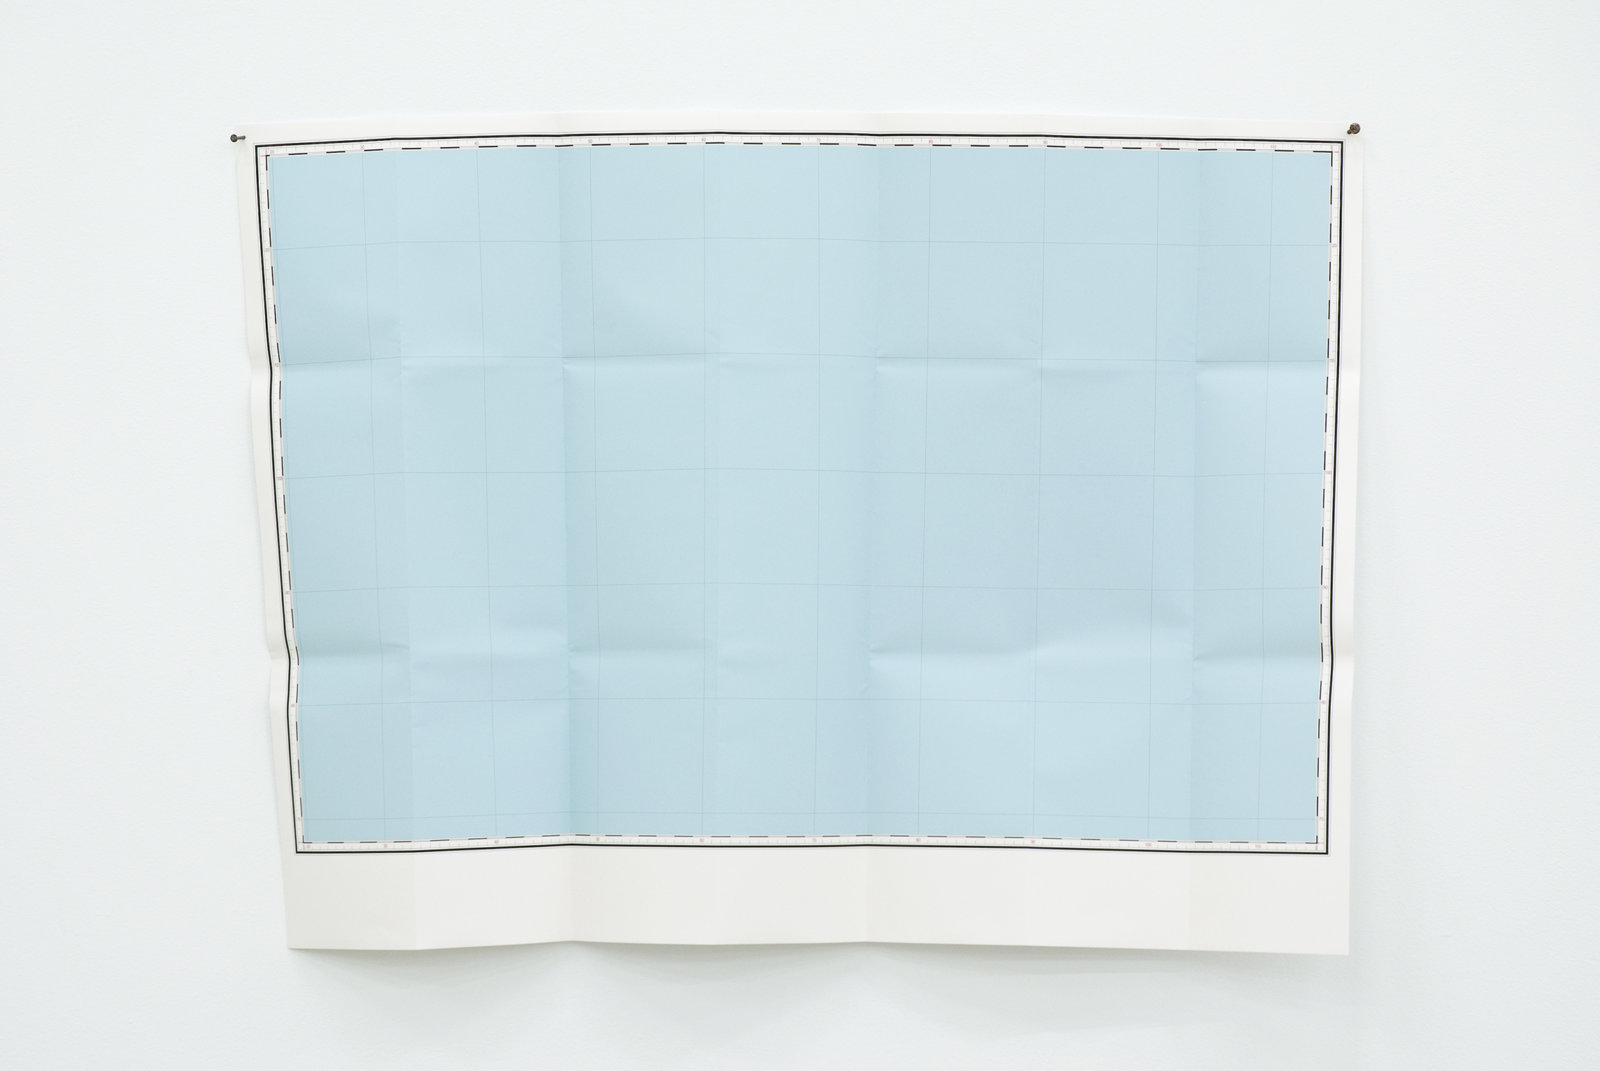 Ashes Withyman, Map (from Uncertain Pilgrimage), 2006–2009, paper map, 22 x 30 in. (55 x 76 cm)